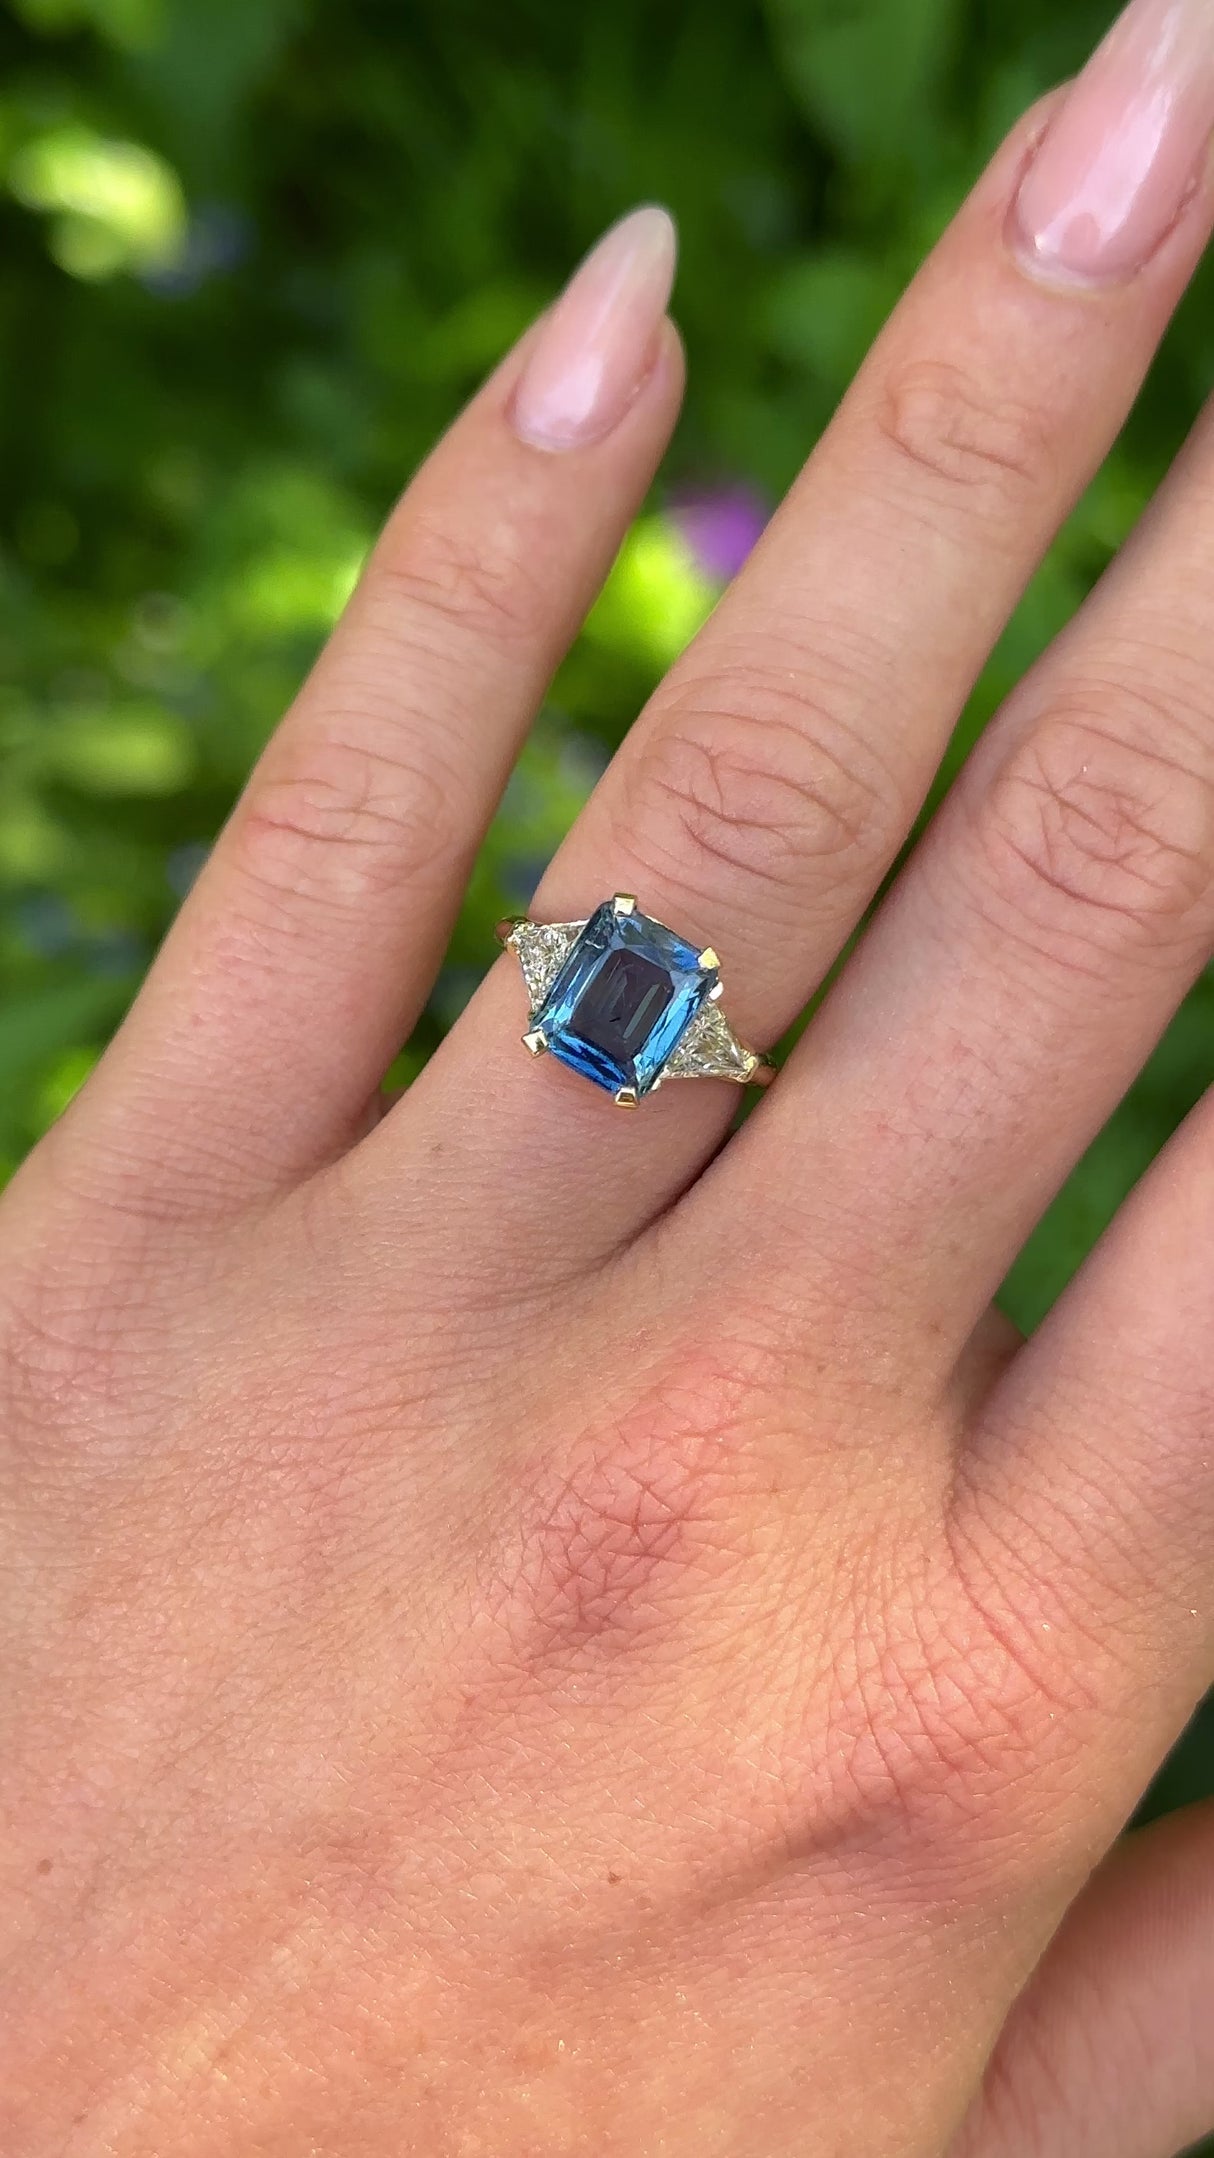 Vintage, Blue Sapphire and Trilliant-cut Diamond Three Stone ring, 18ct Yellow Gold worn on hand.